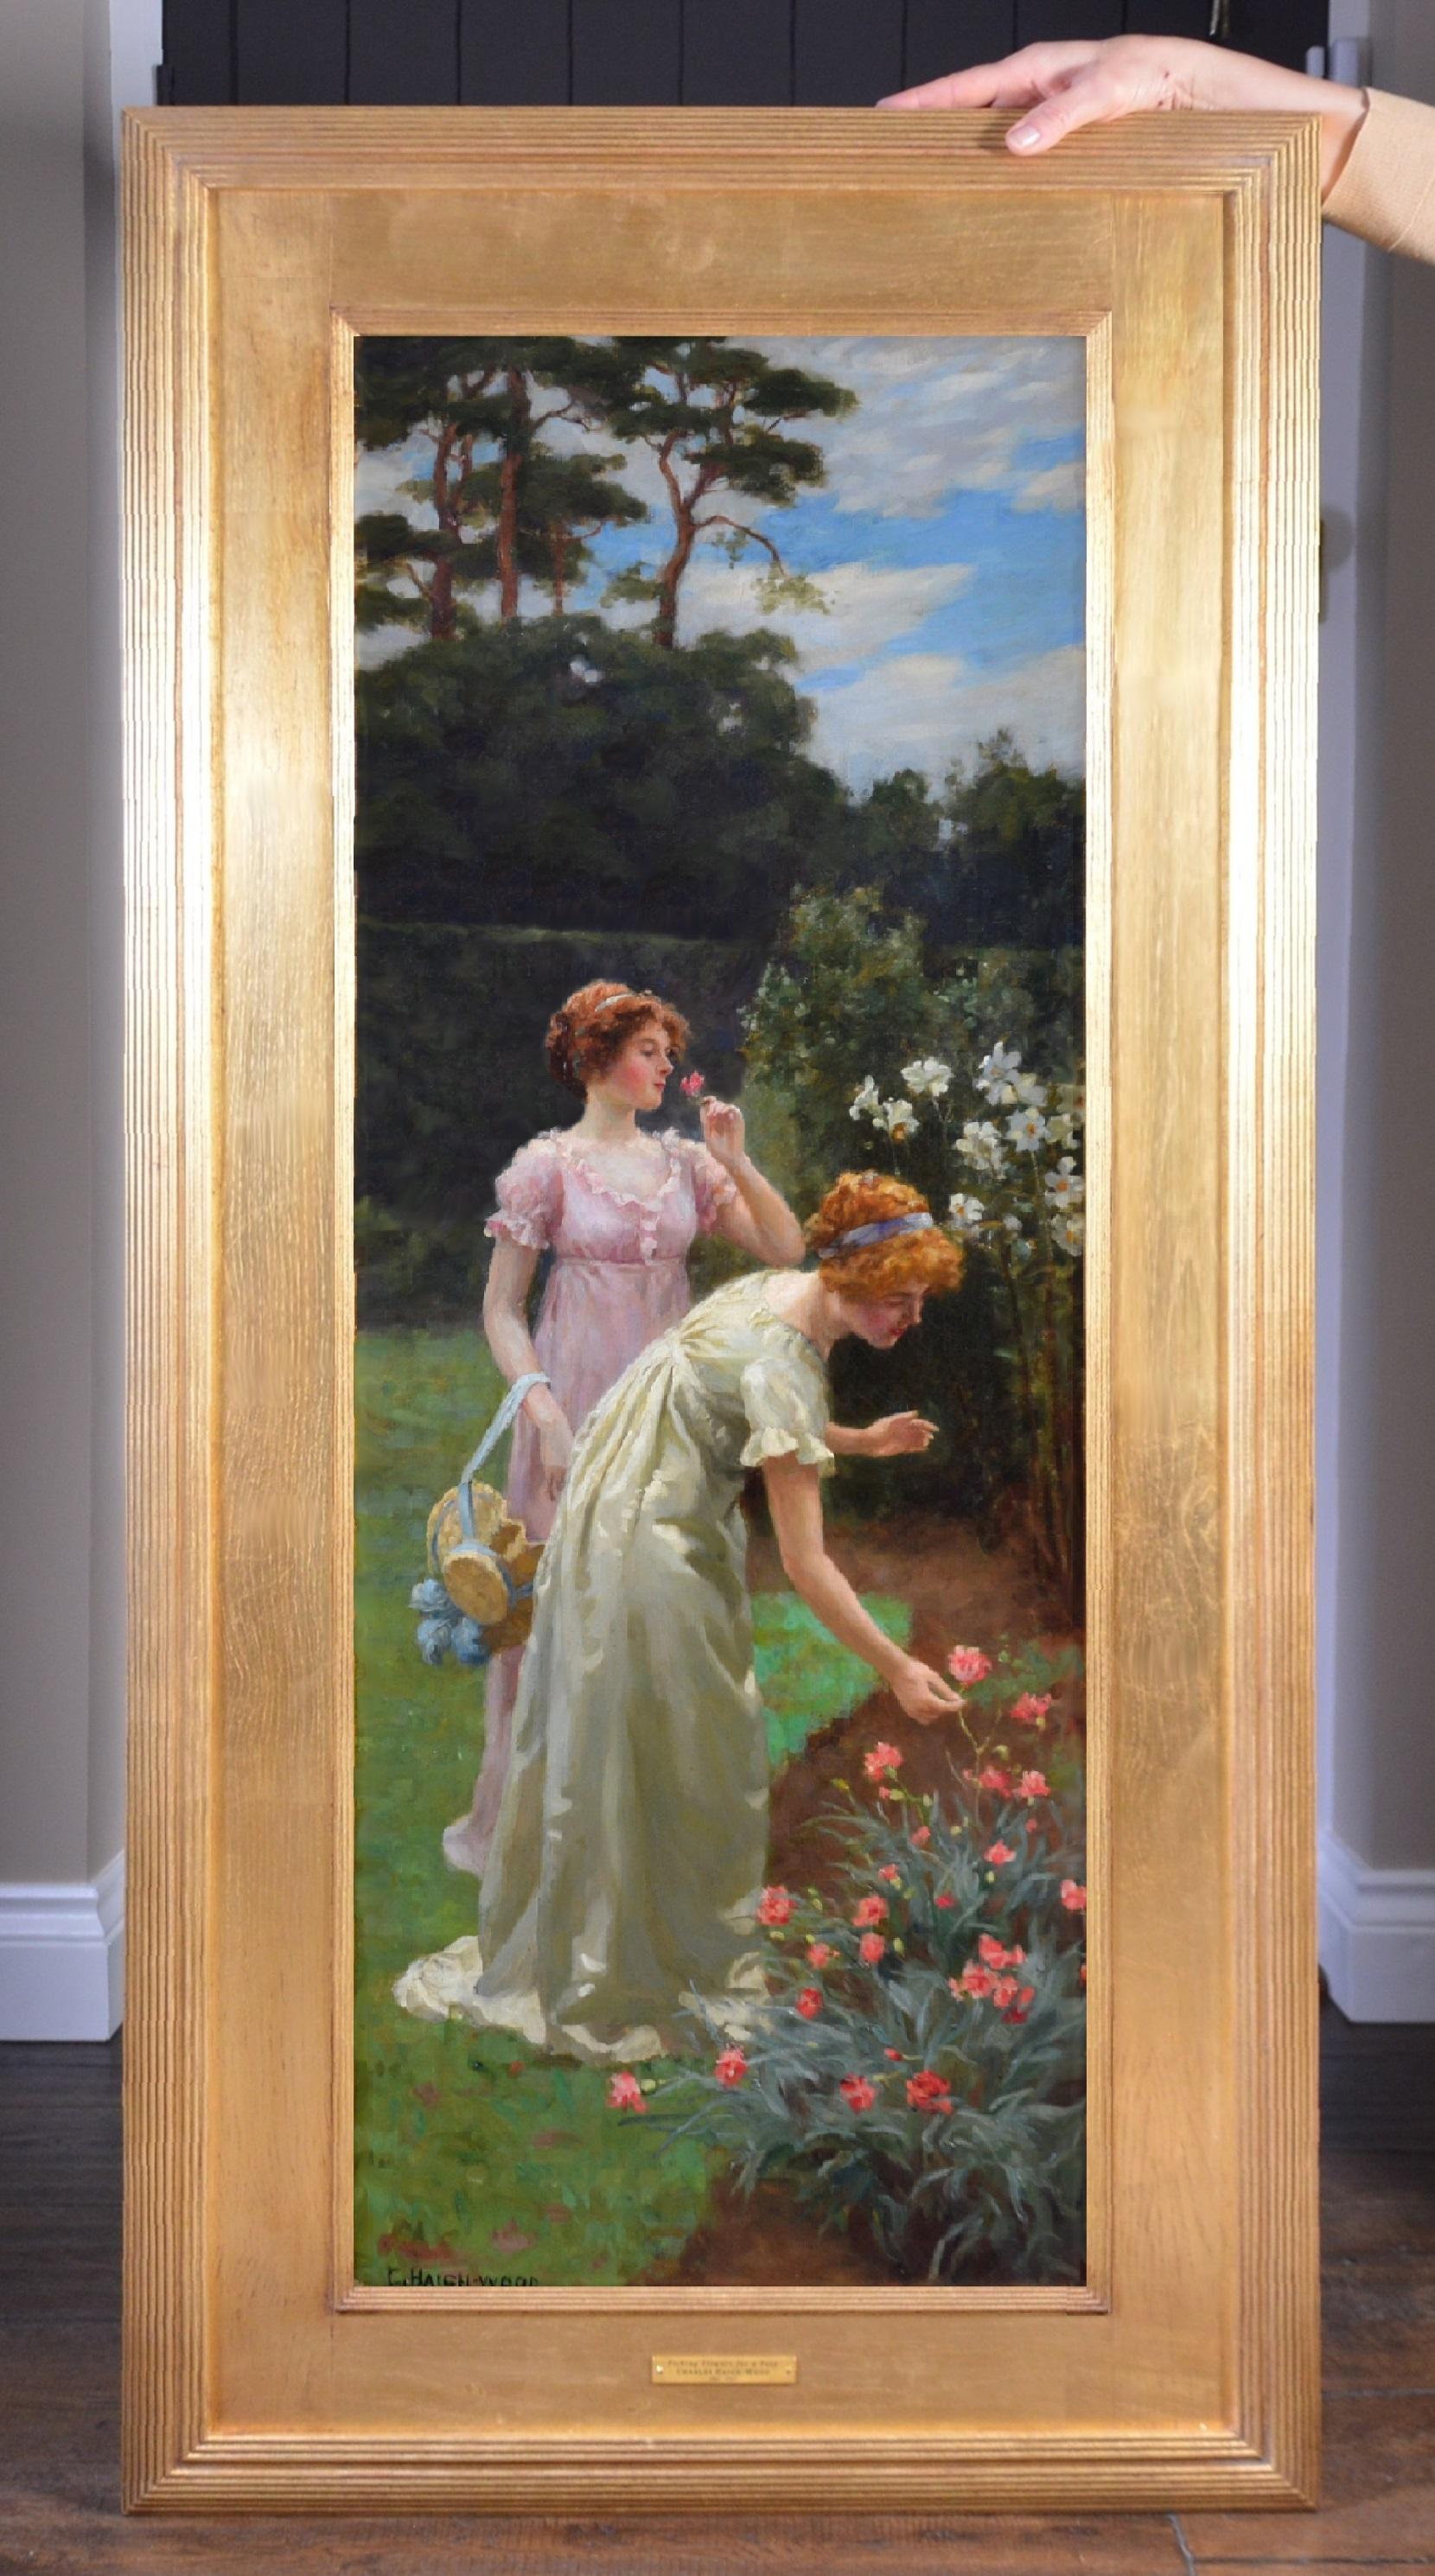 Charles Haigh-Wood Animal Painting - Picking Flowers for a Posy - 19th Century Oil Painting of English Society Girls